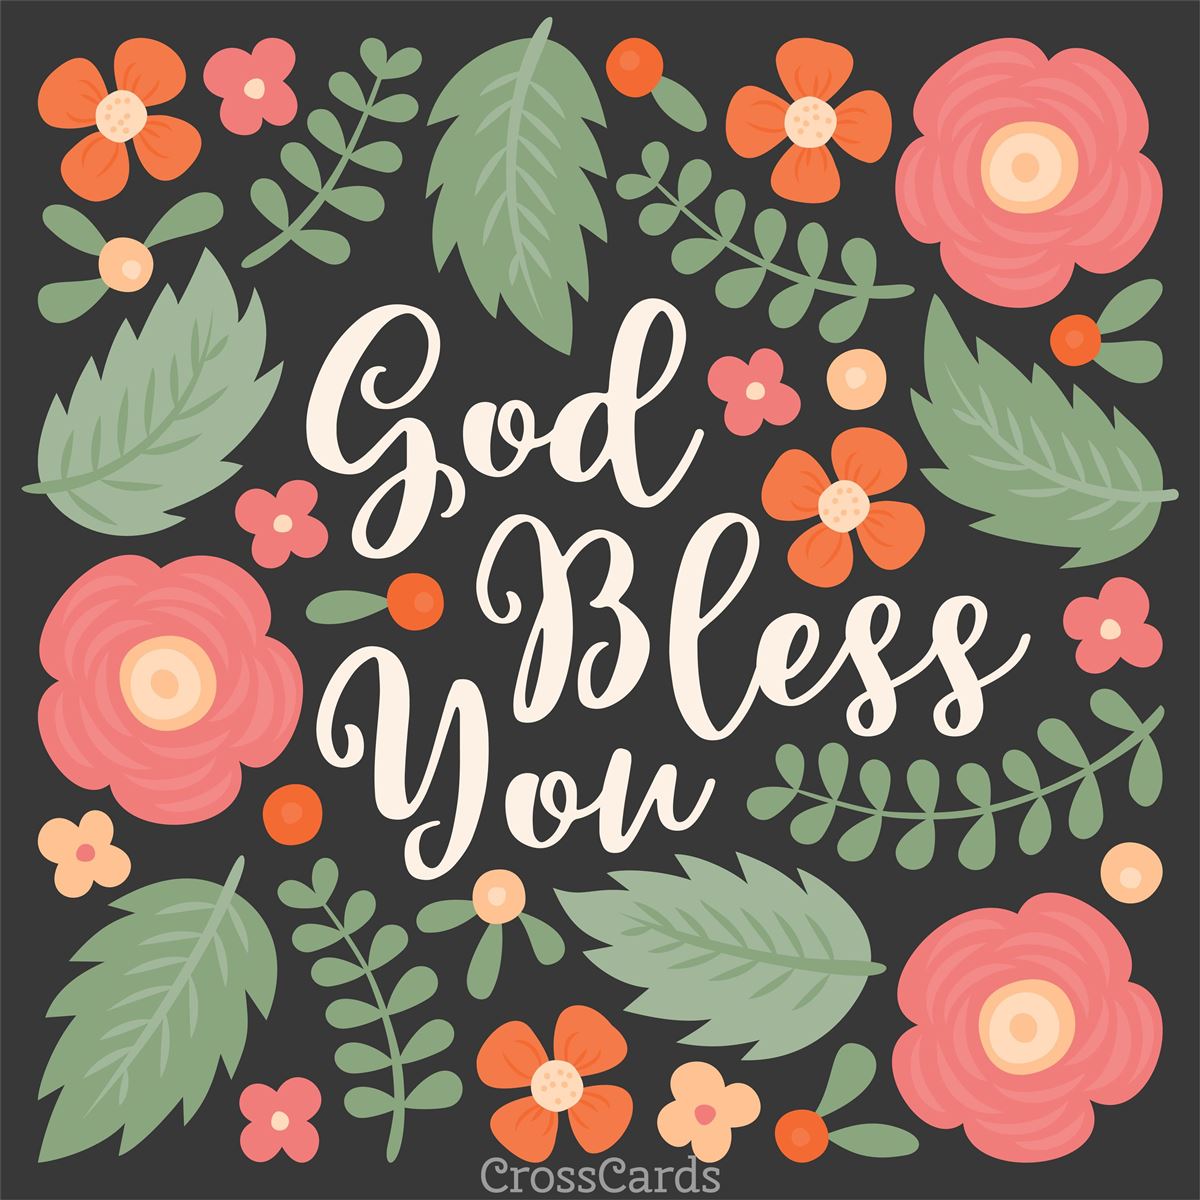 God Bless You eCard - Free Postcards Greeting Cards Online